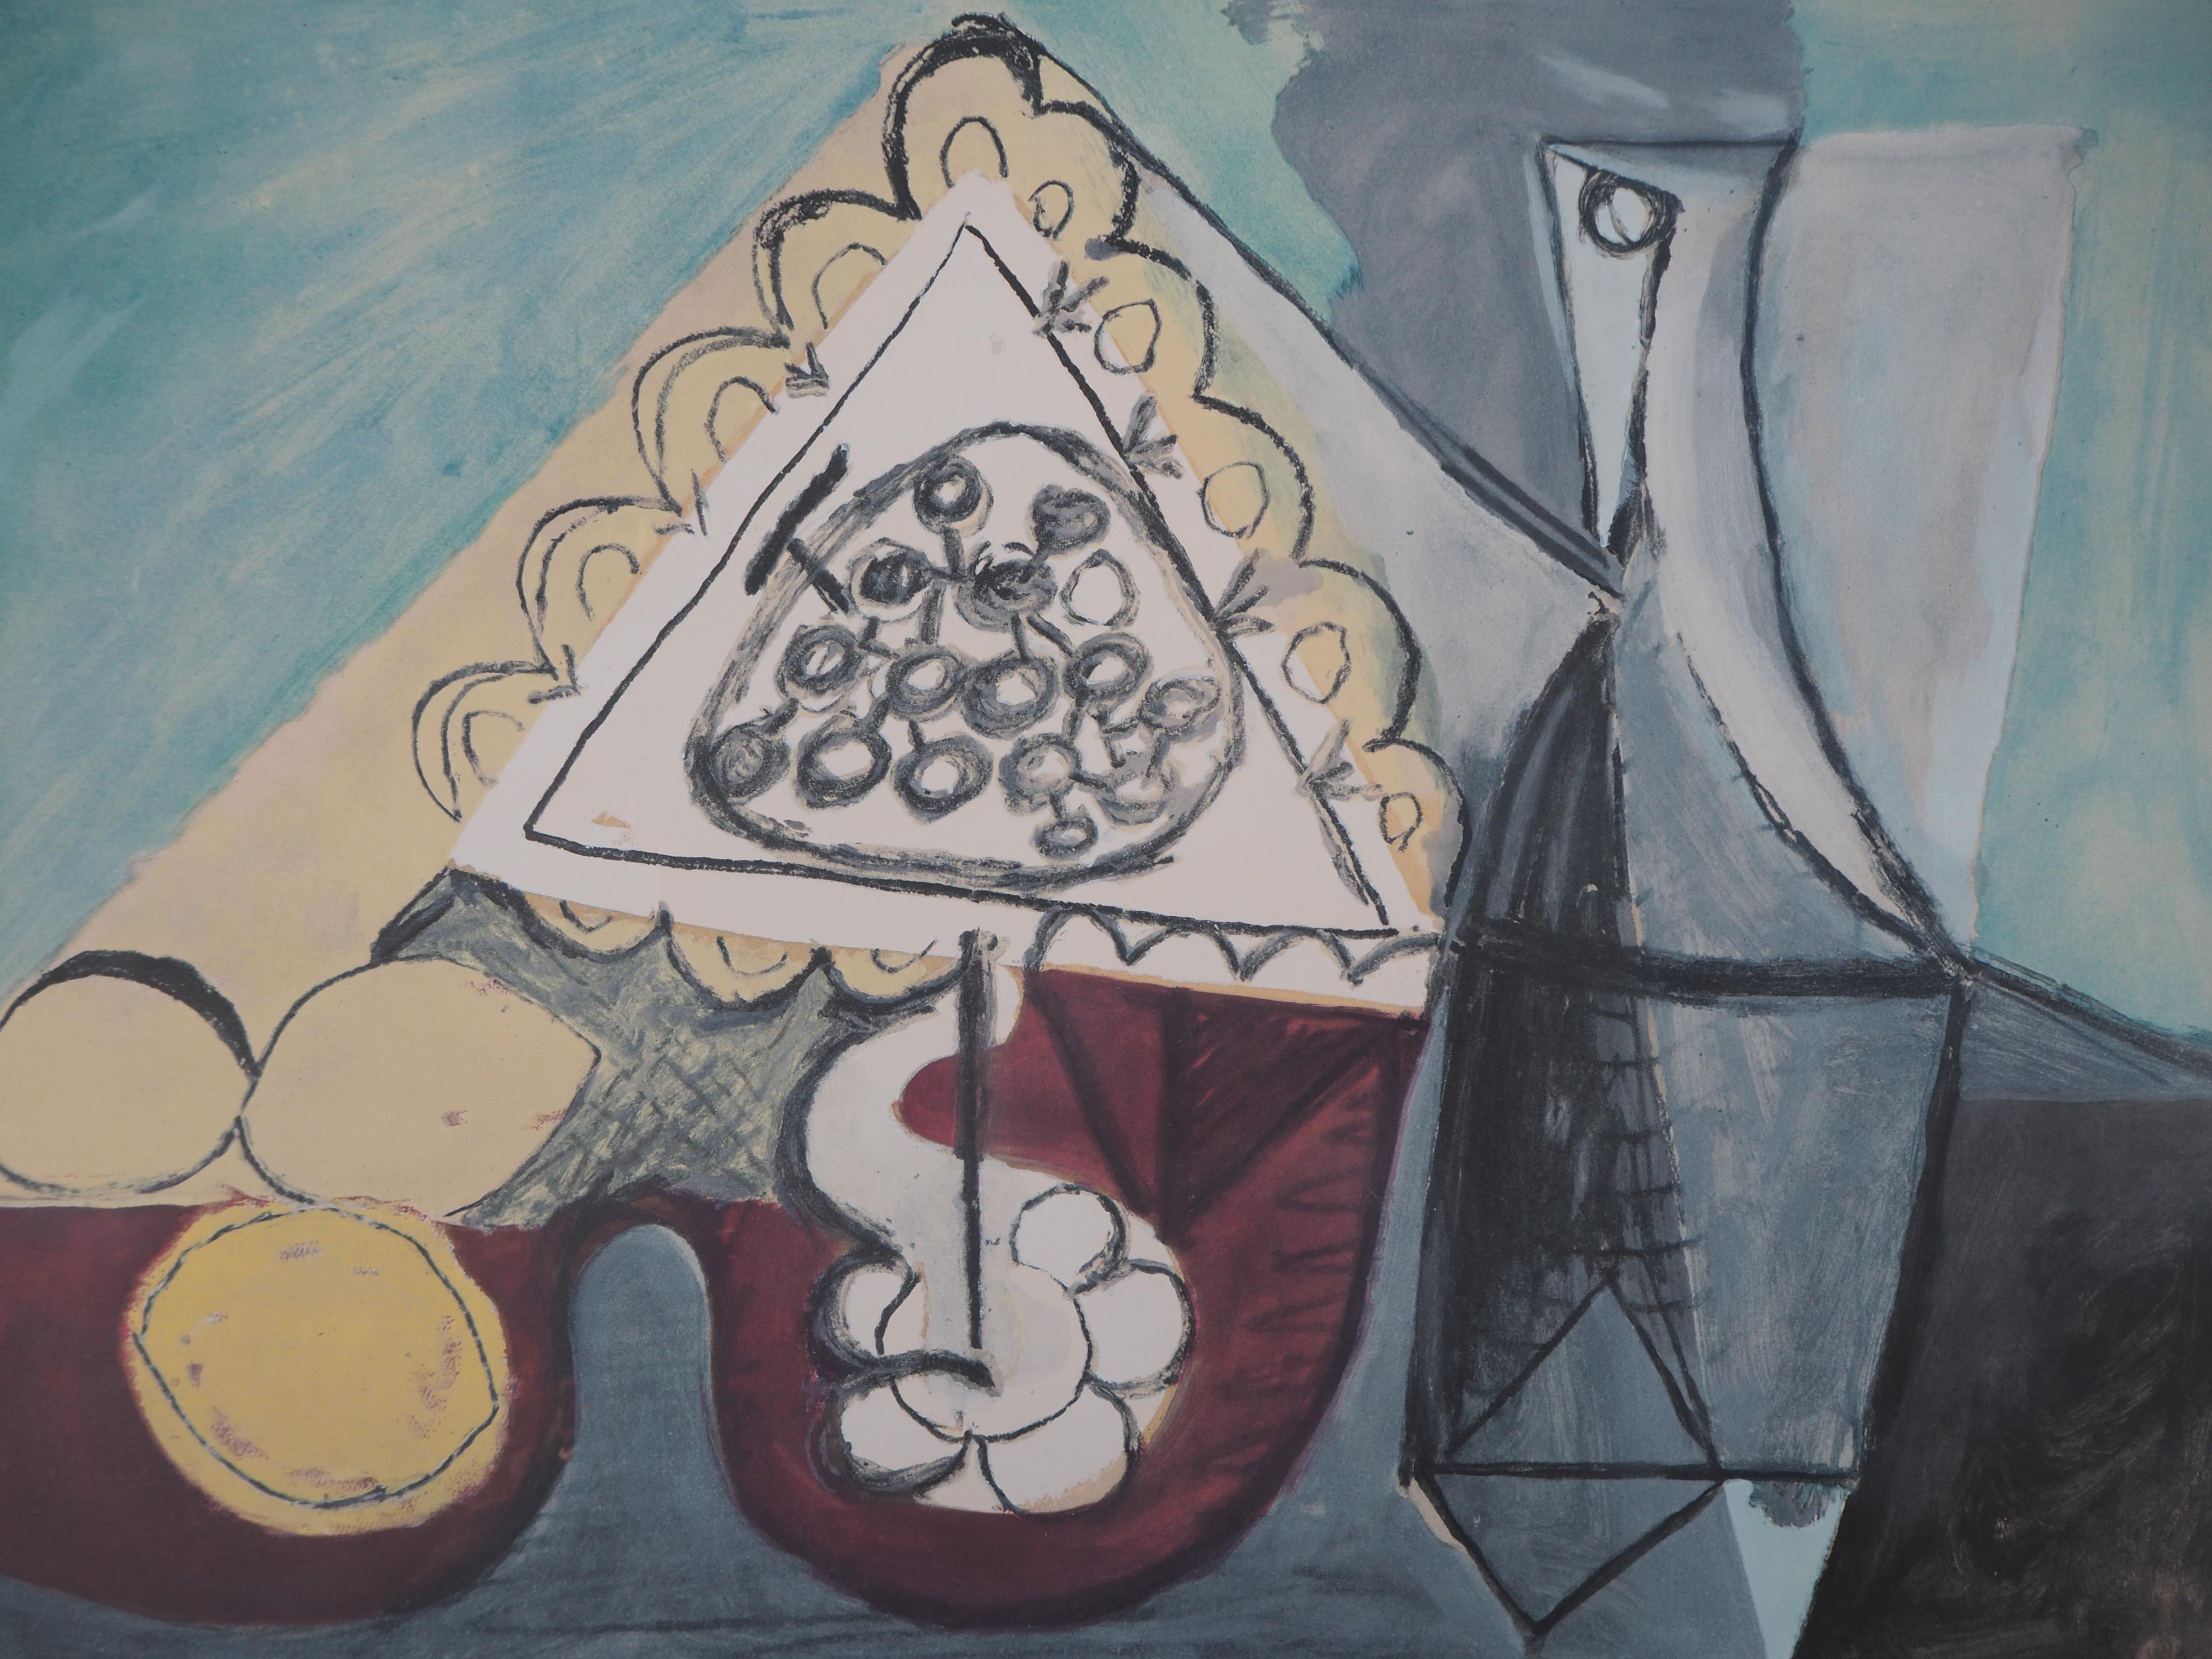 Still Life with Lemons and Bottle - Lithograph (Jacomet 1960) - Print by (after) Pablo Picasso